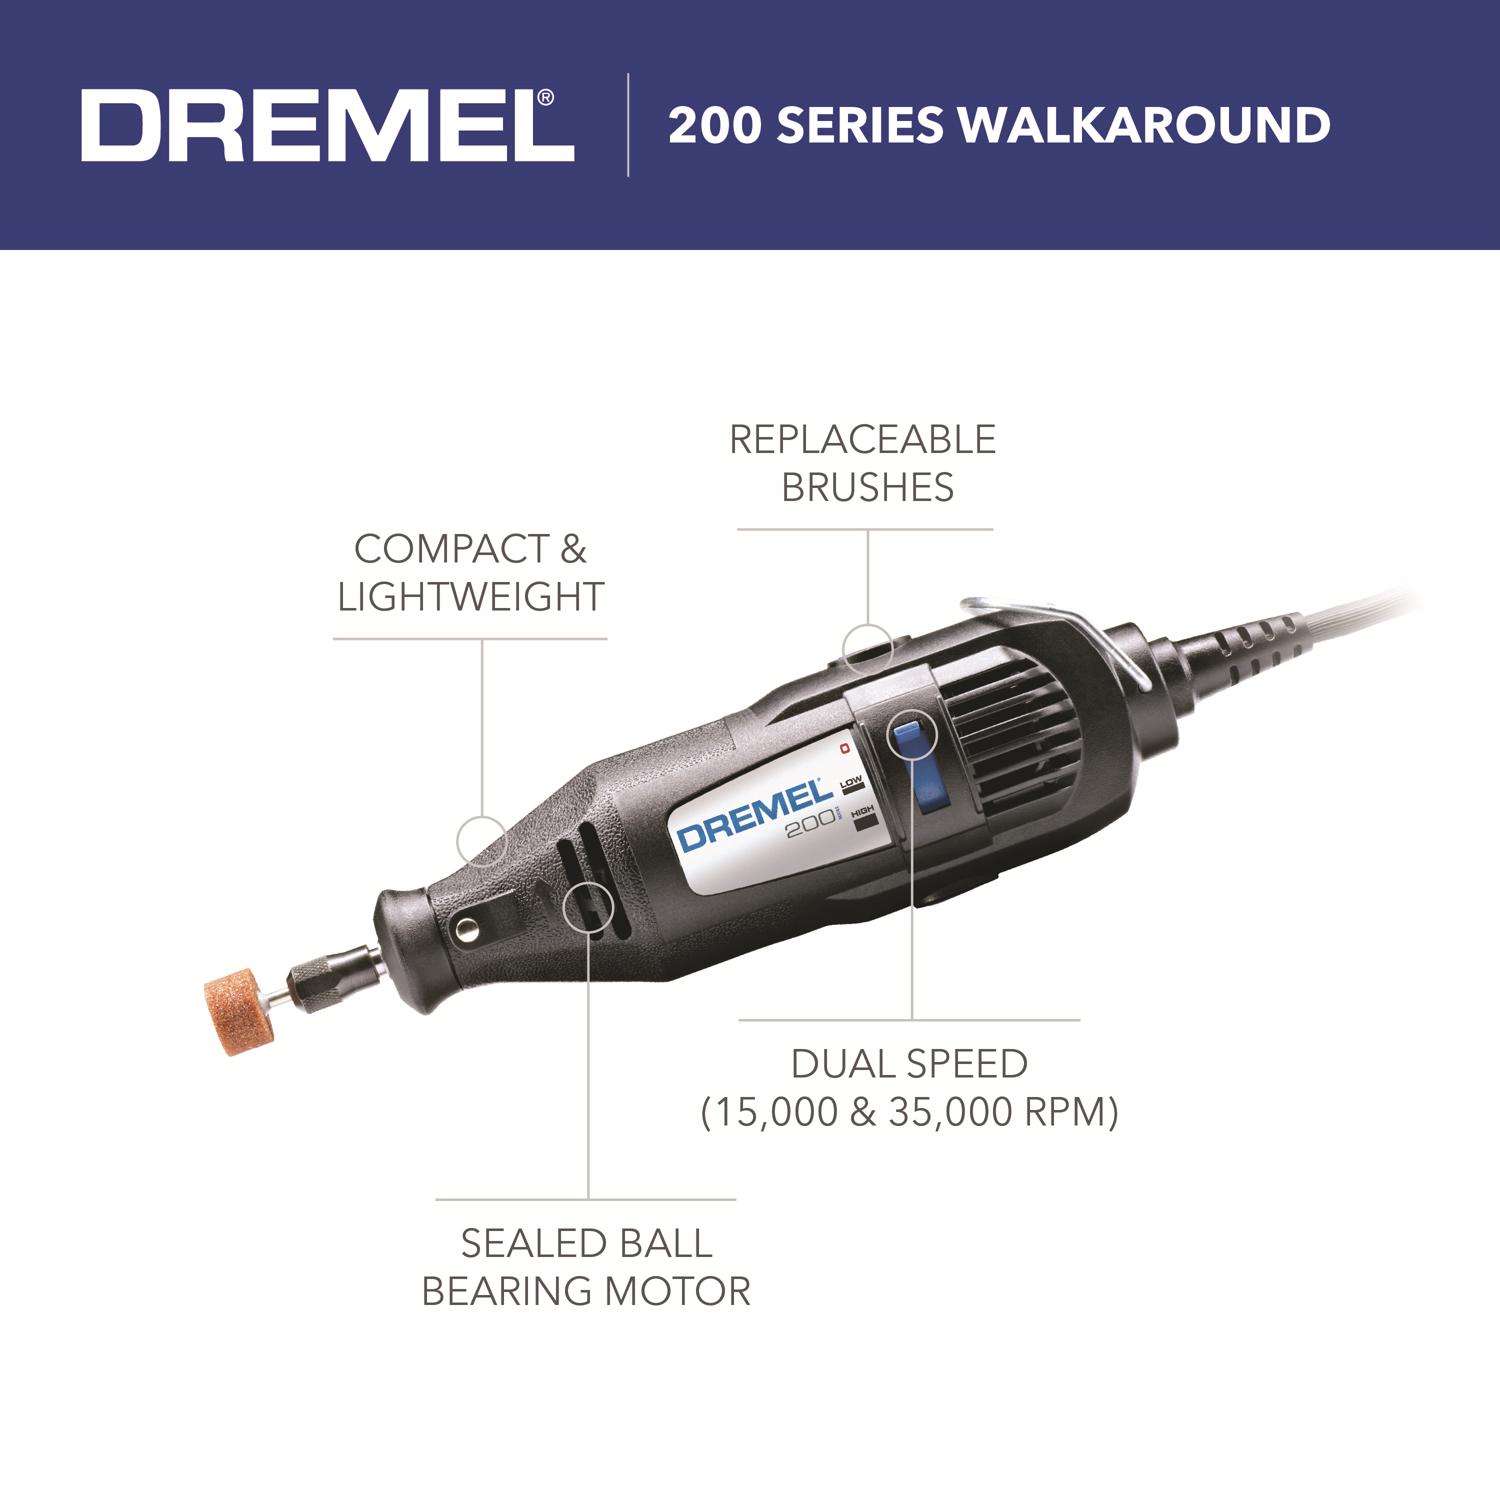 Dremel 4000 spare part advice? Get new electronic speed control and new  brushes? : r/fixit